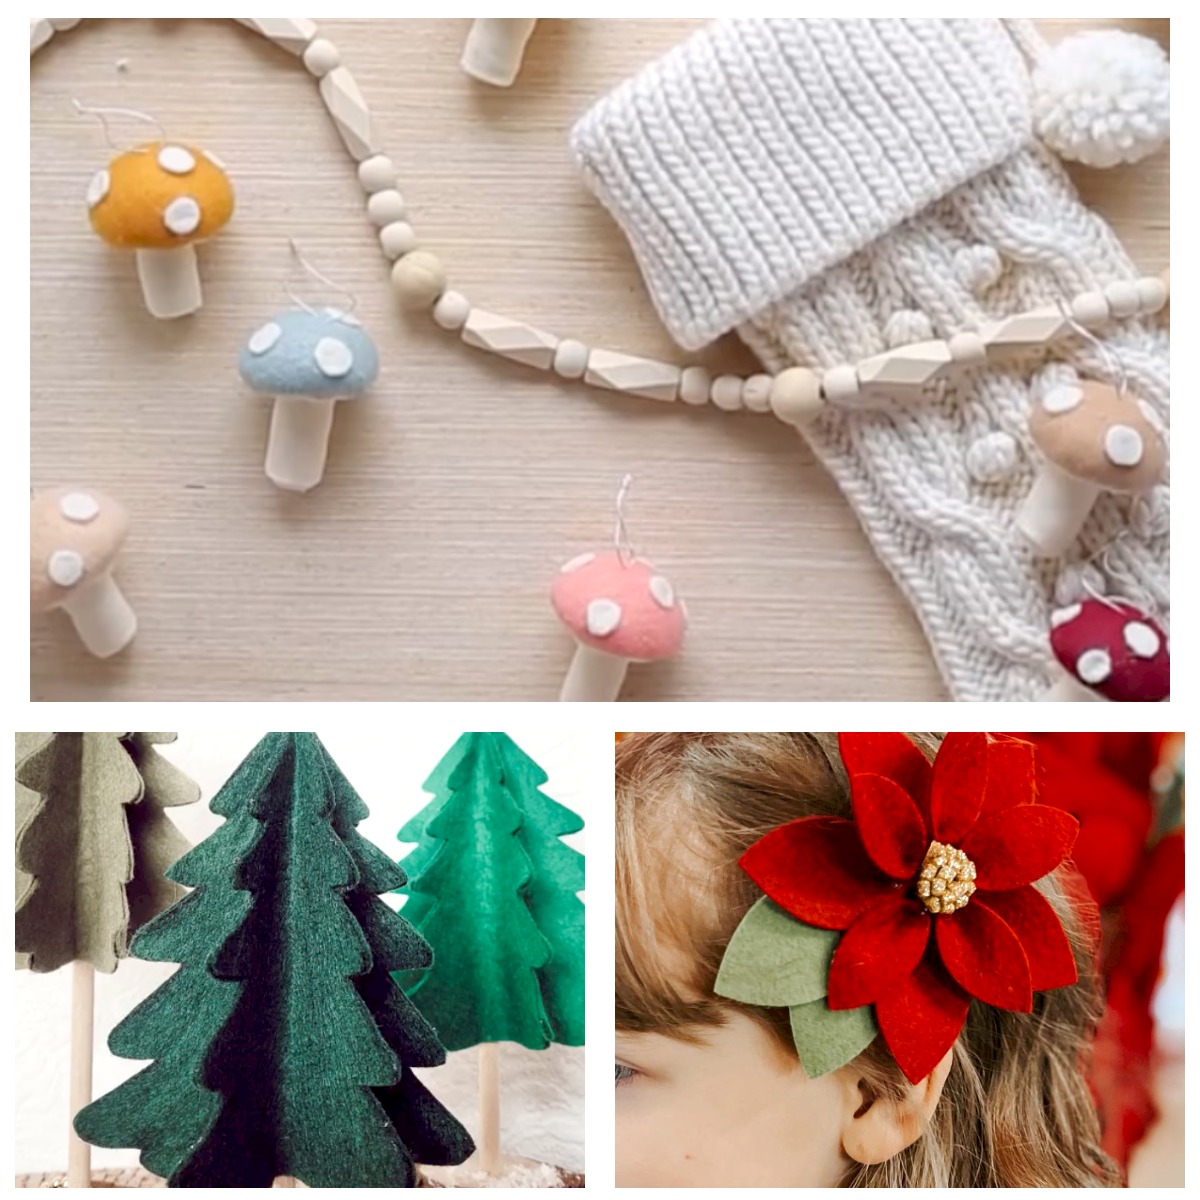 Cozy Christmas Fabric Ornaments - Crafting Cheerfully